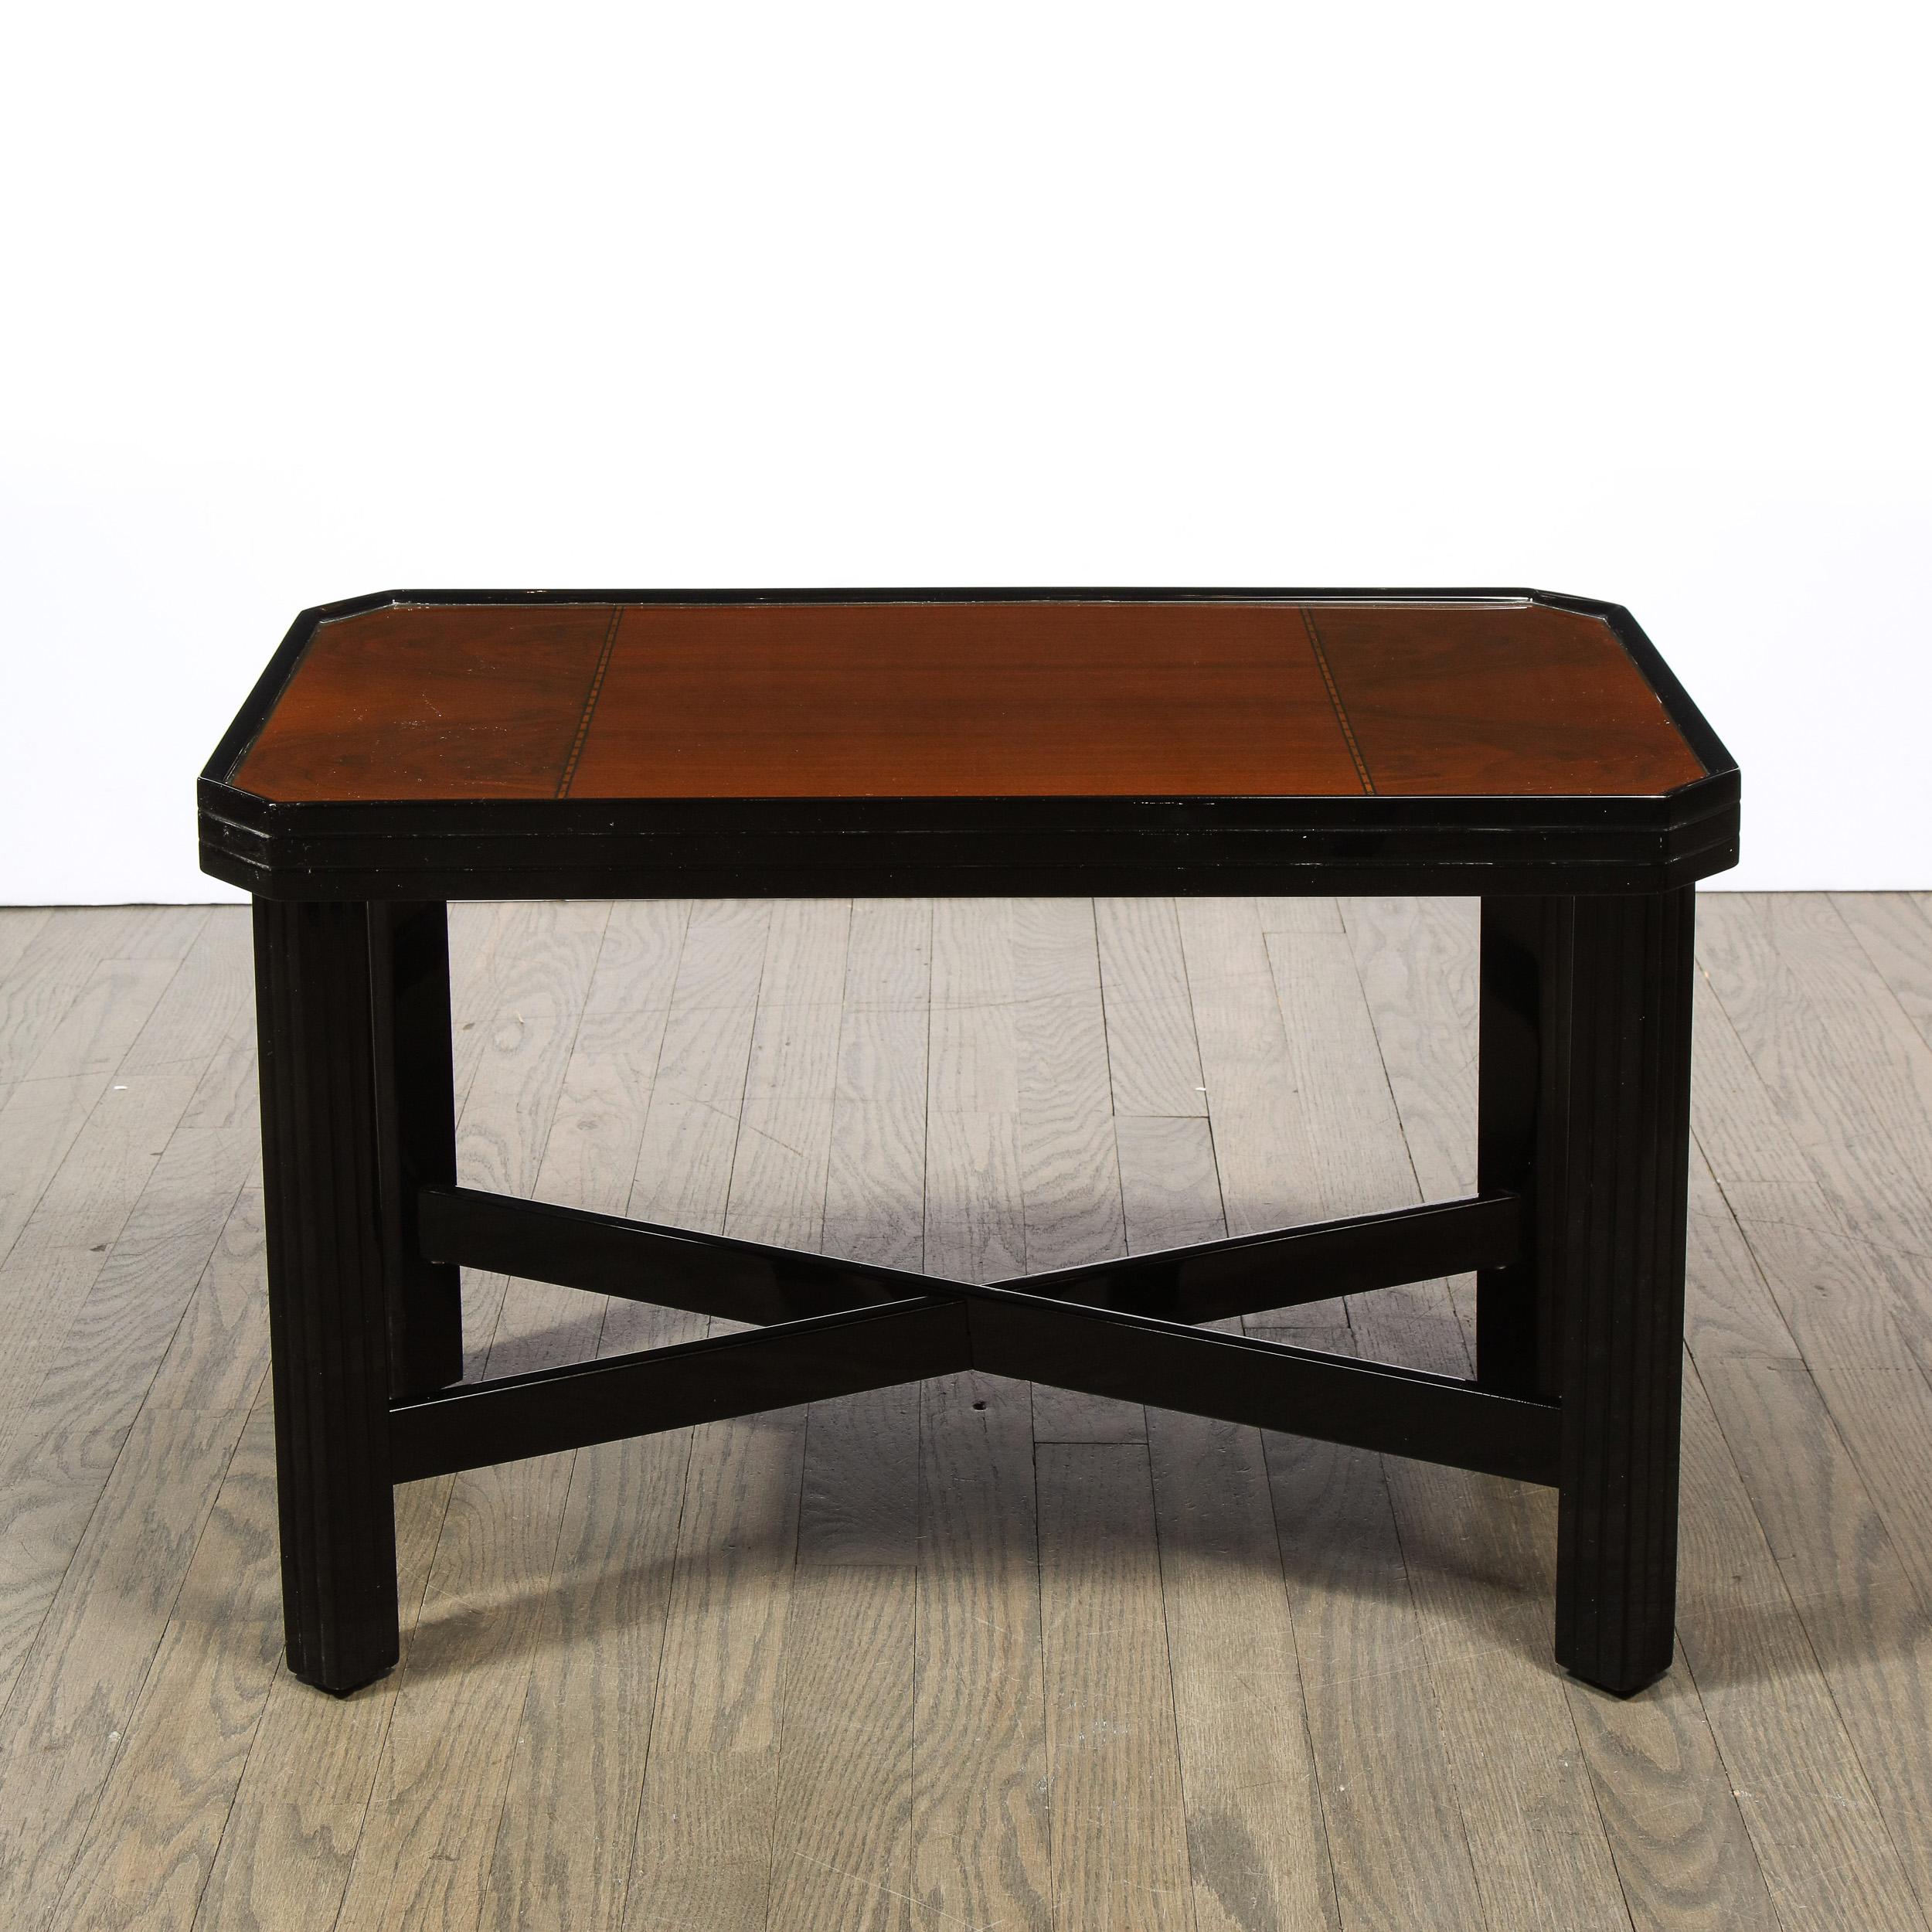 This elegant Art Deco Machine Age table was realized in the United States circa 1935. It features rectilinear legs connected by x form supports- all in lustrous black lacquer. The top features a bookmatched walnut center bookended on each side by